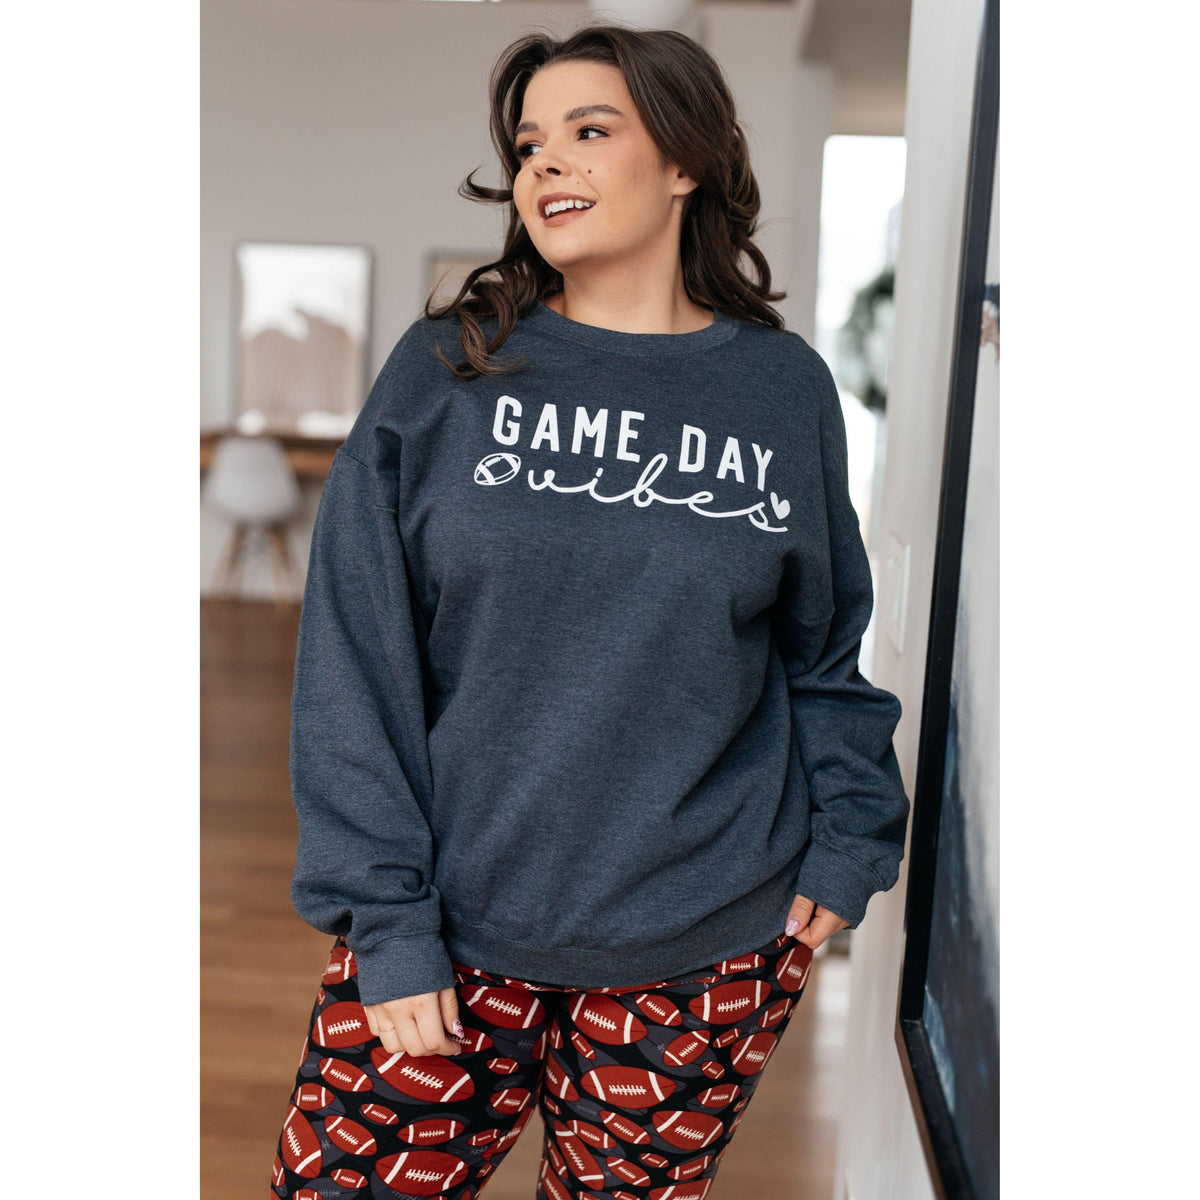 Women's Game Day Vibes Pullover in Gray - becauseofadi